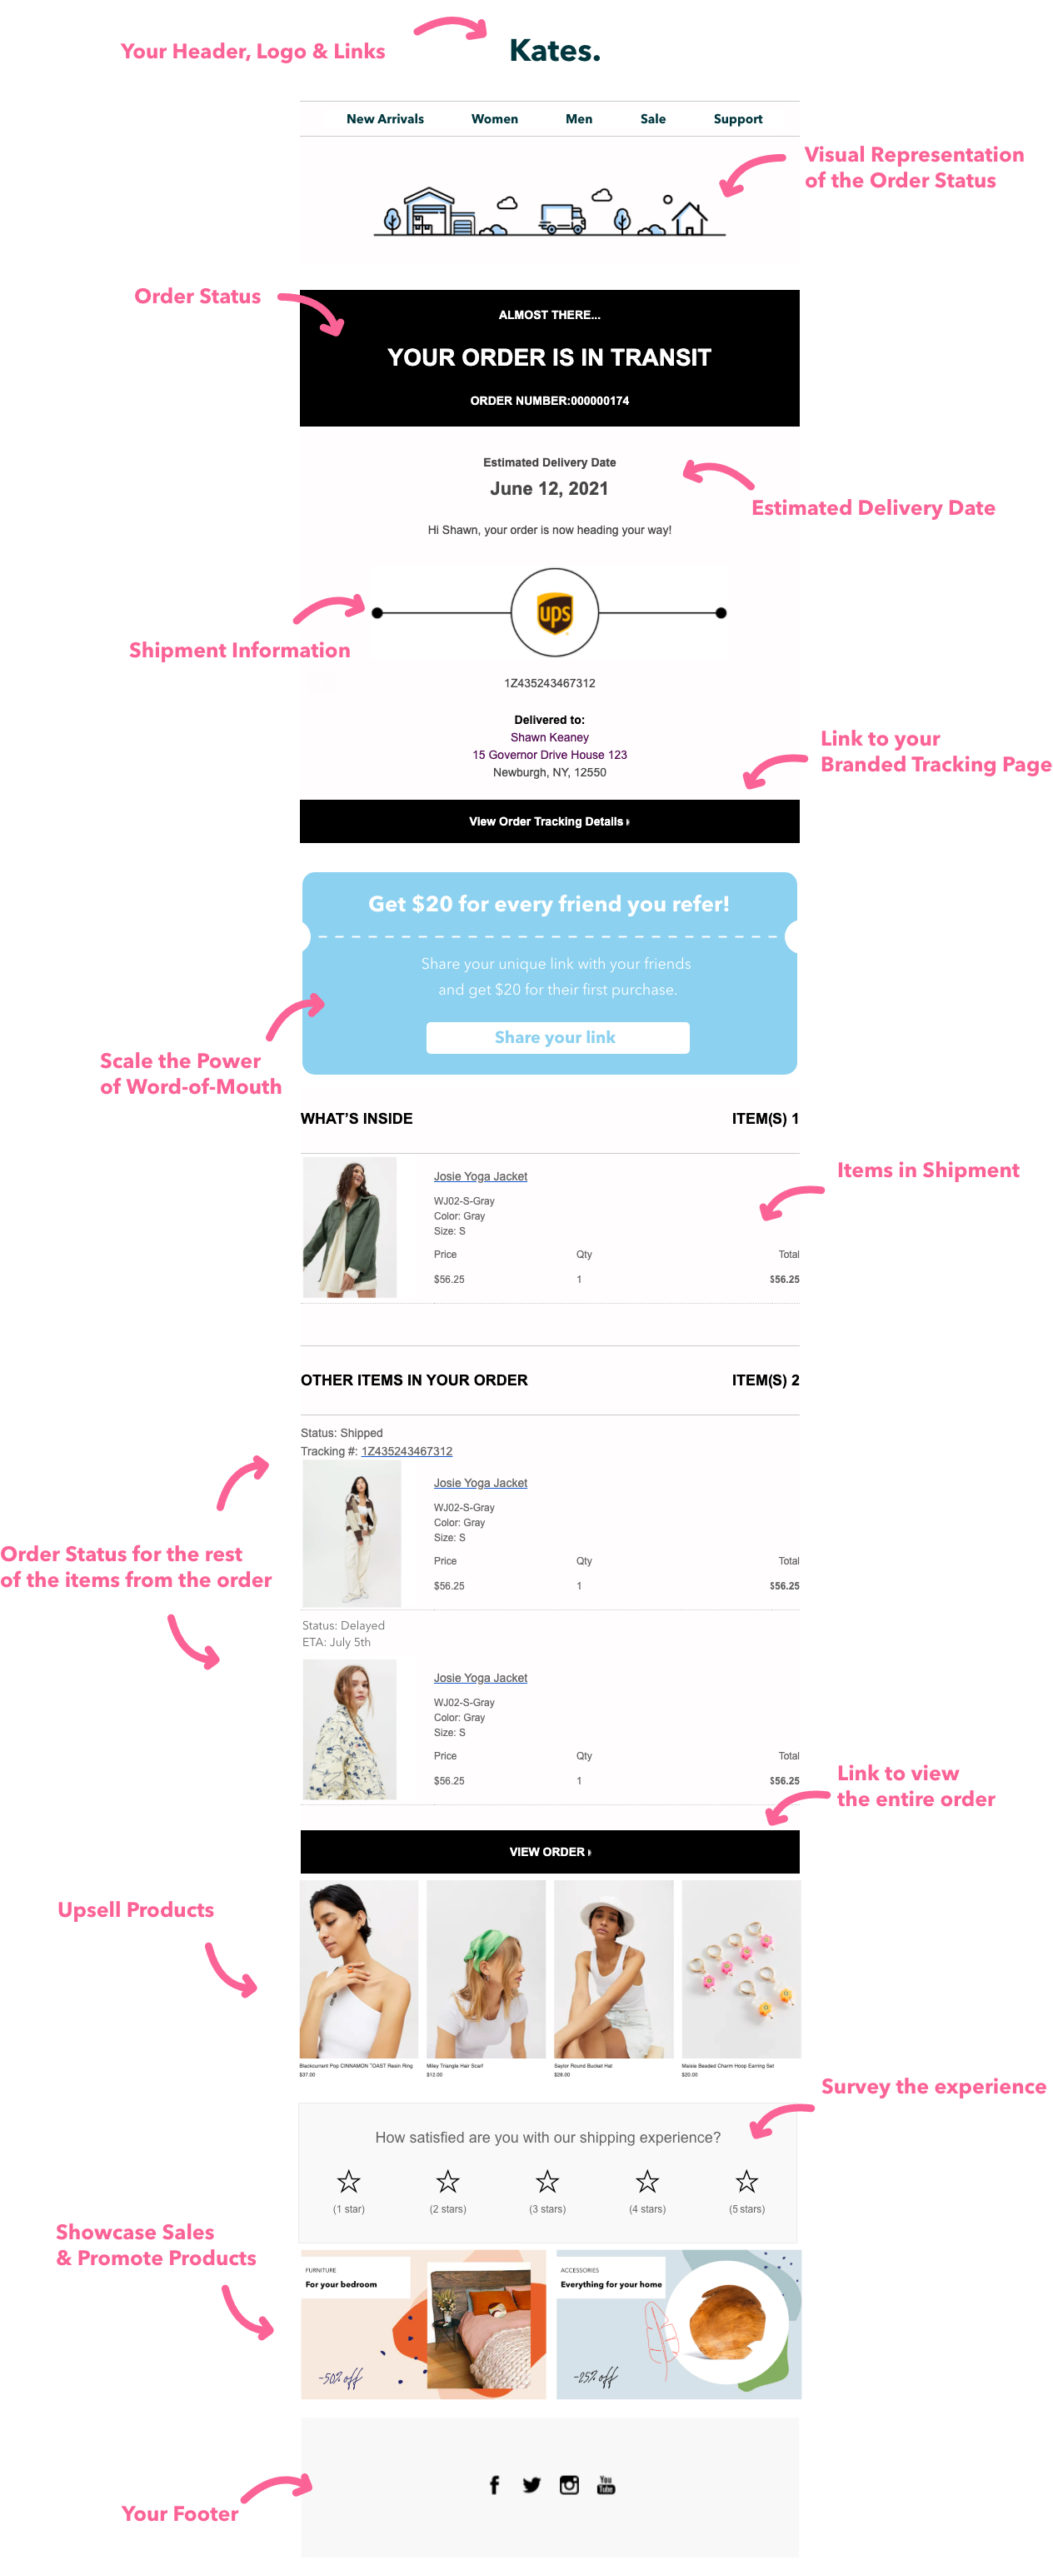 branded shipping notifications via SMS and Email